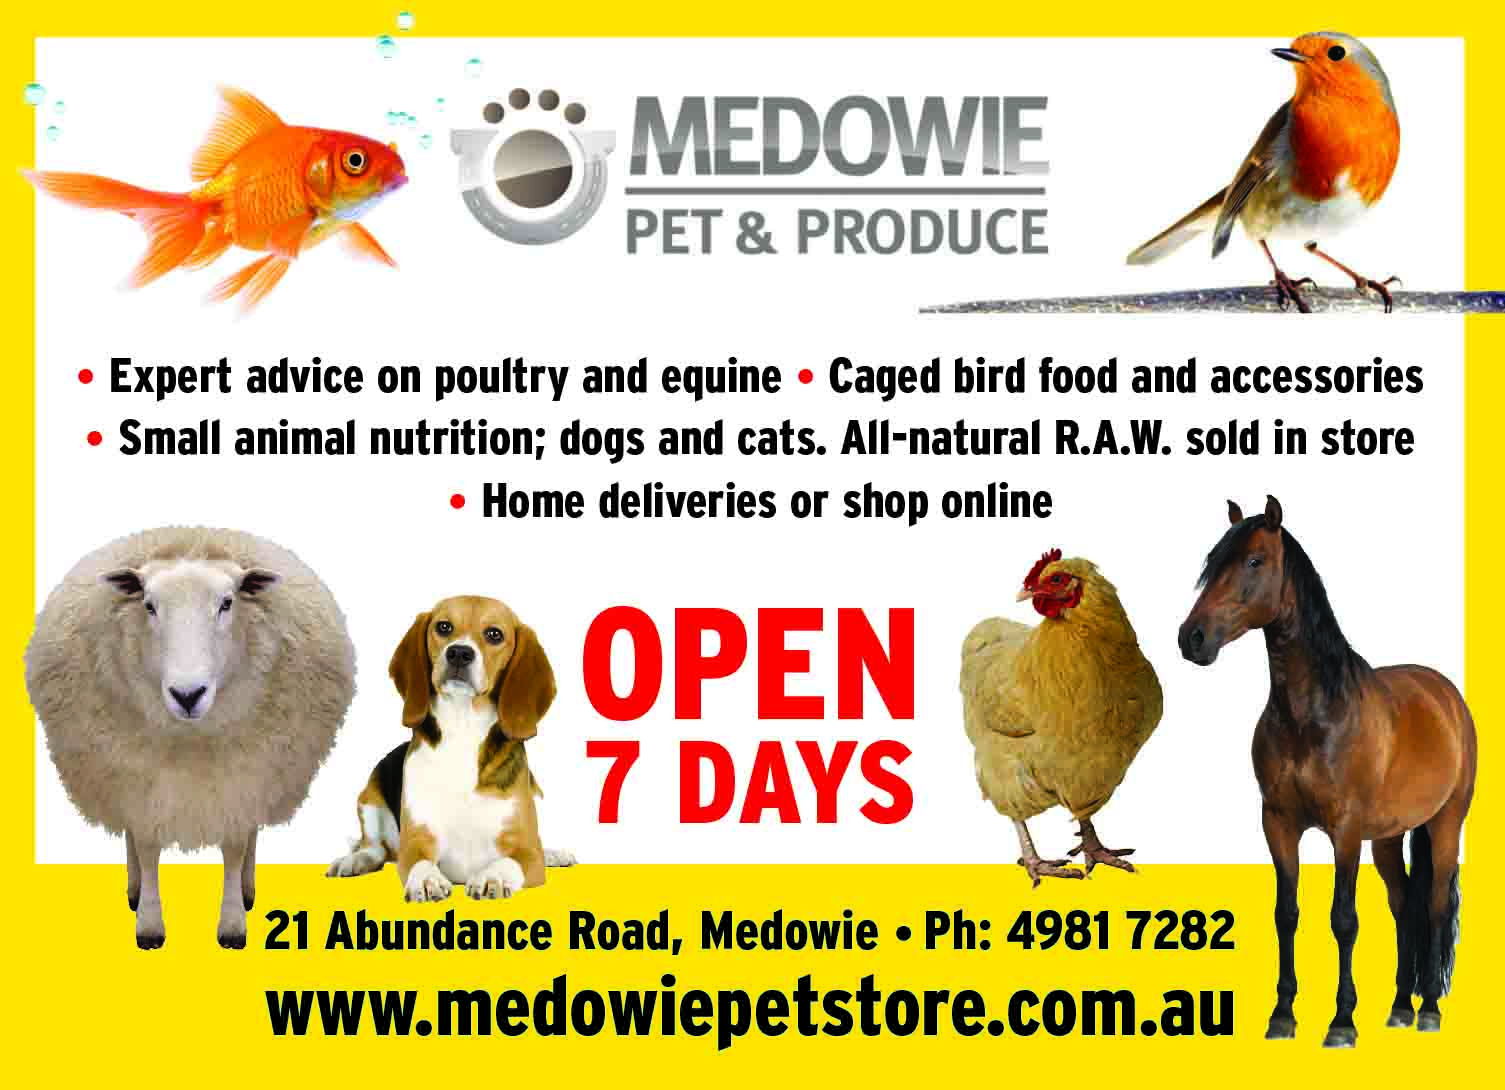  Medowie Pet and Produce